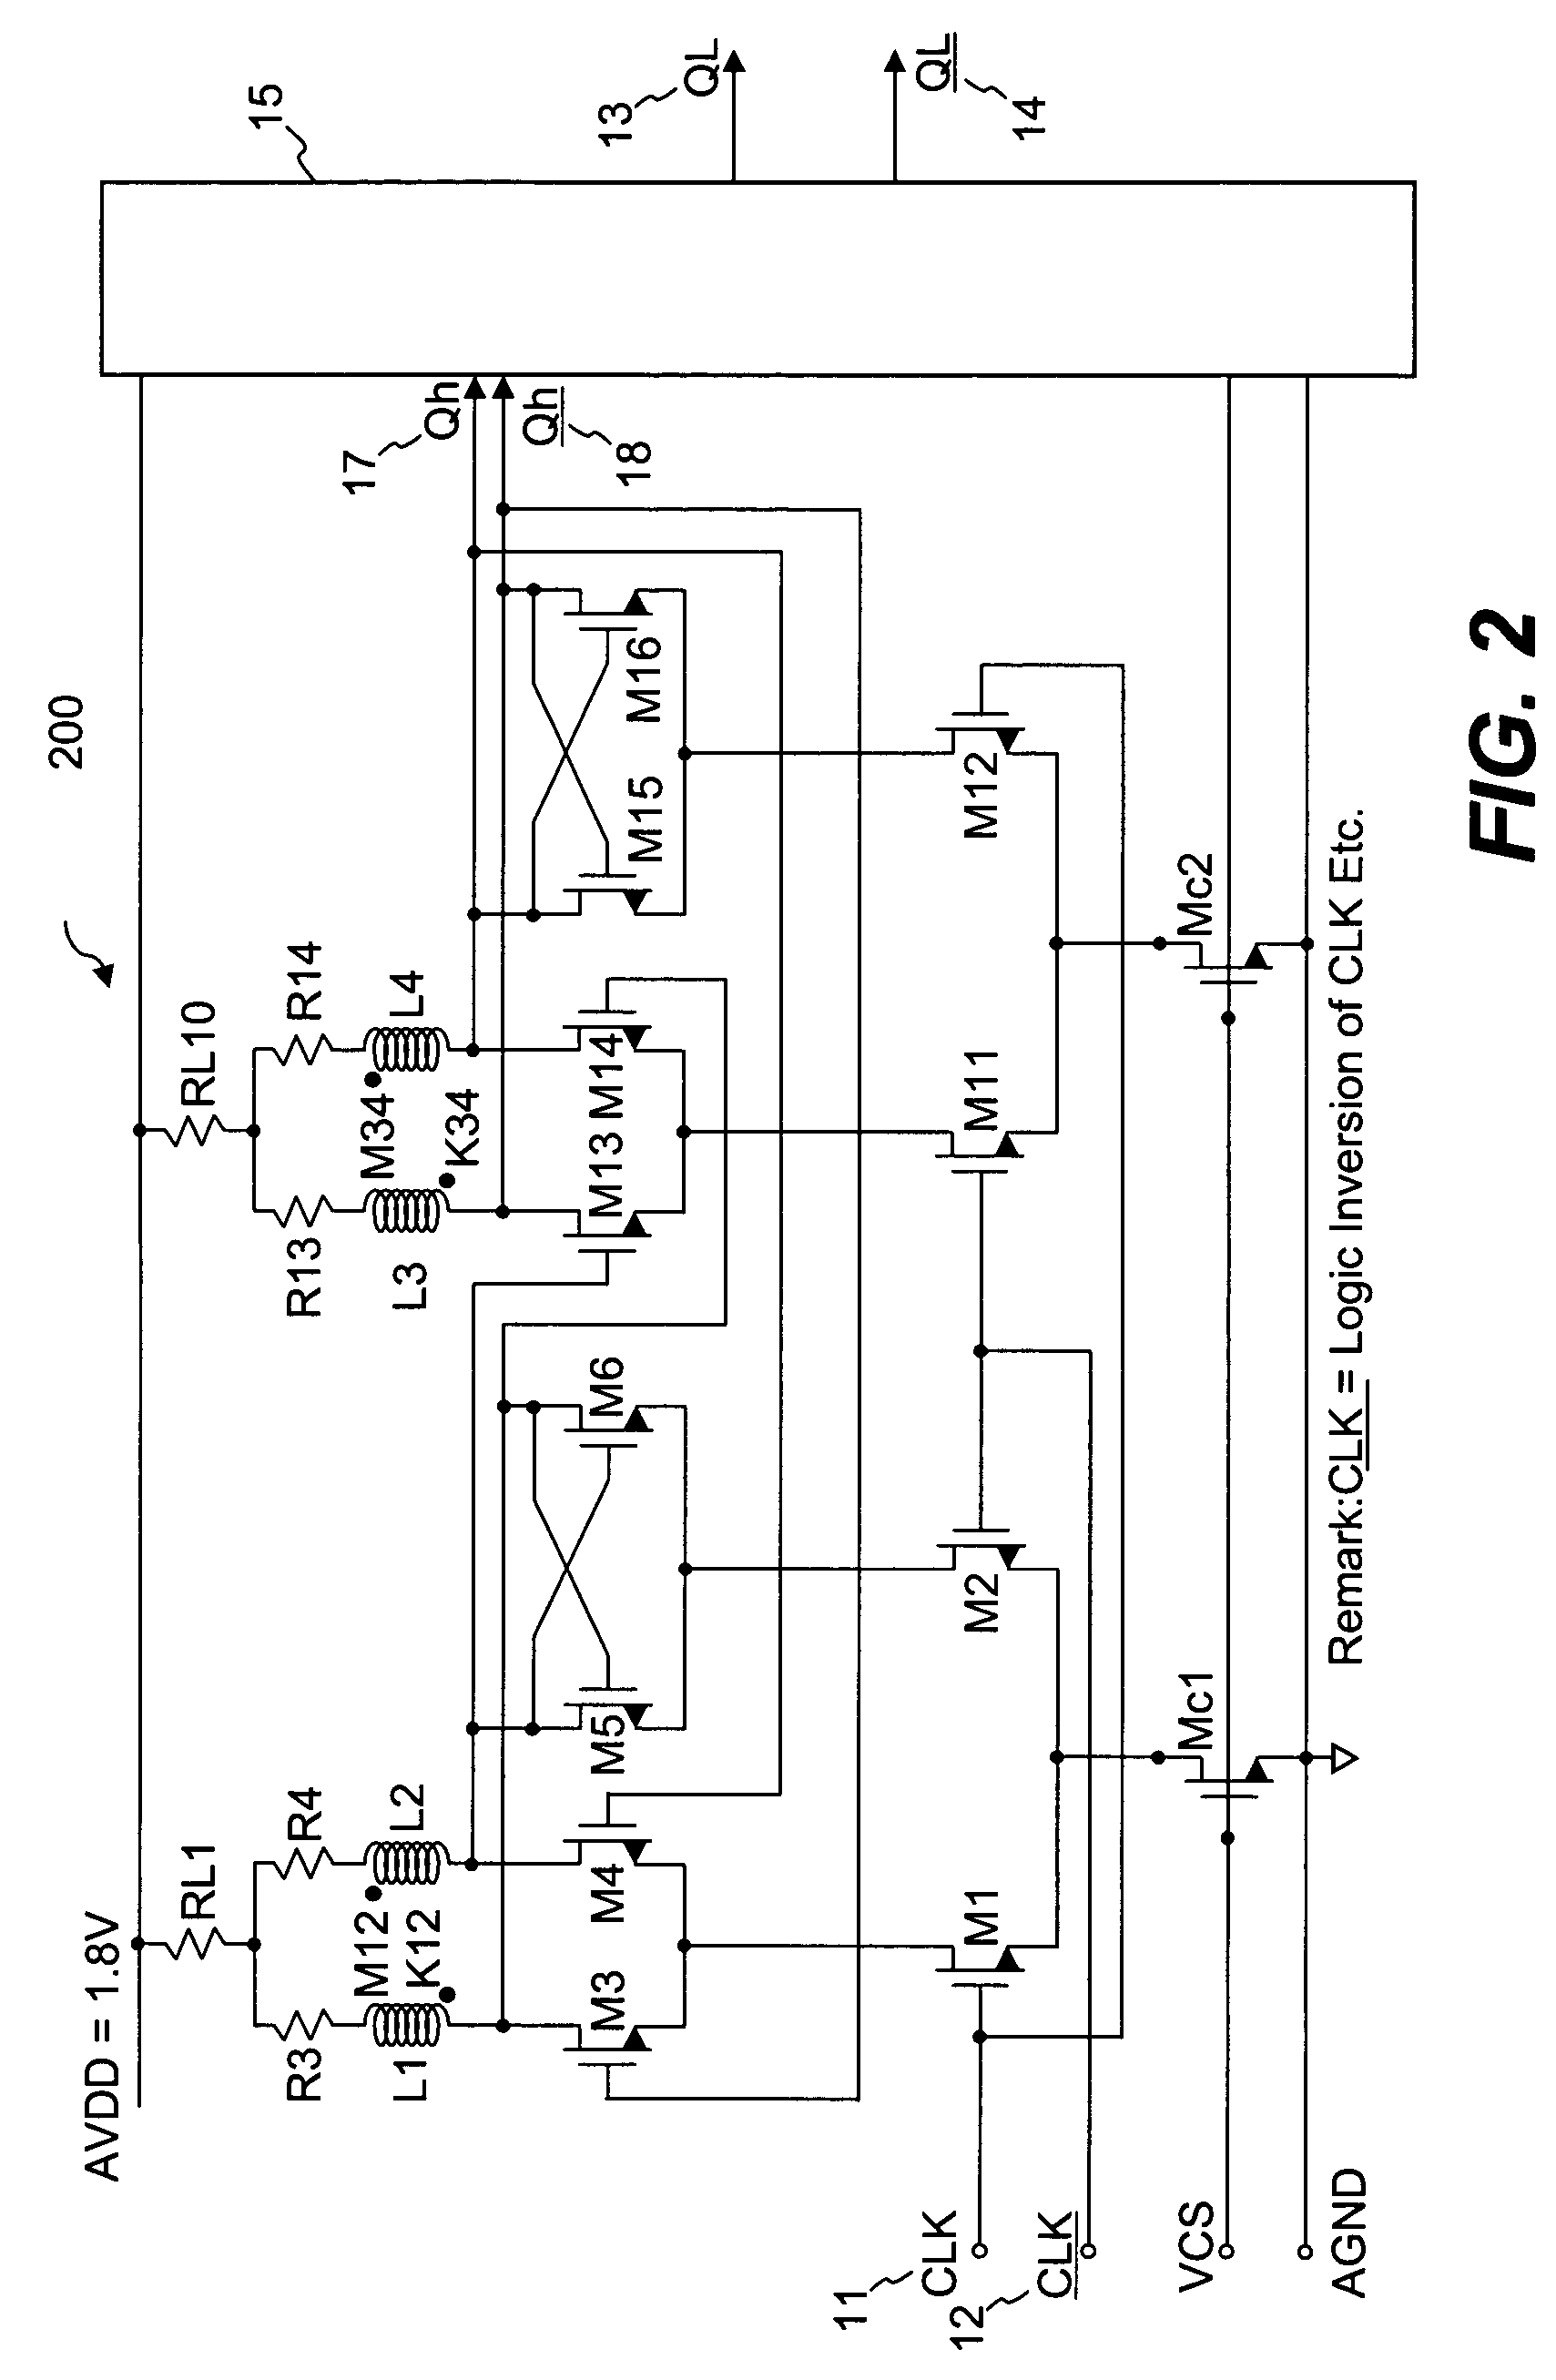 Center-tap transformers in integrated circuits